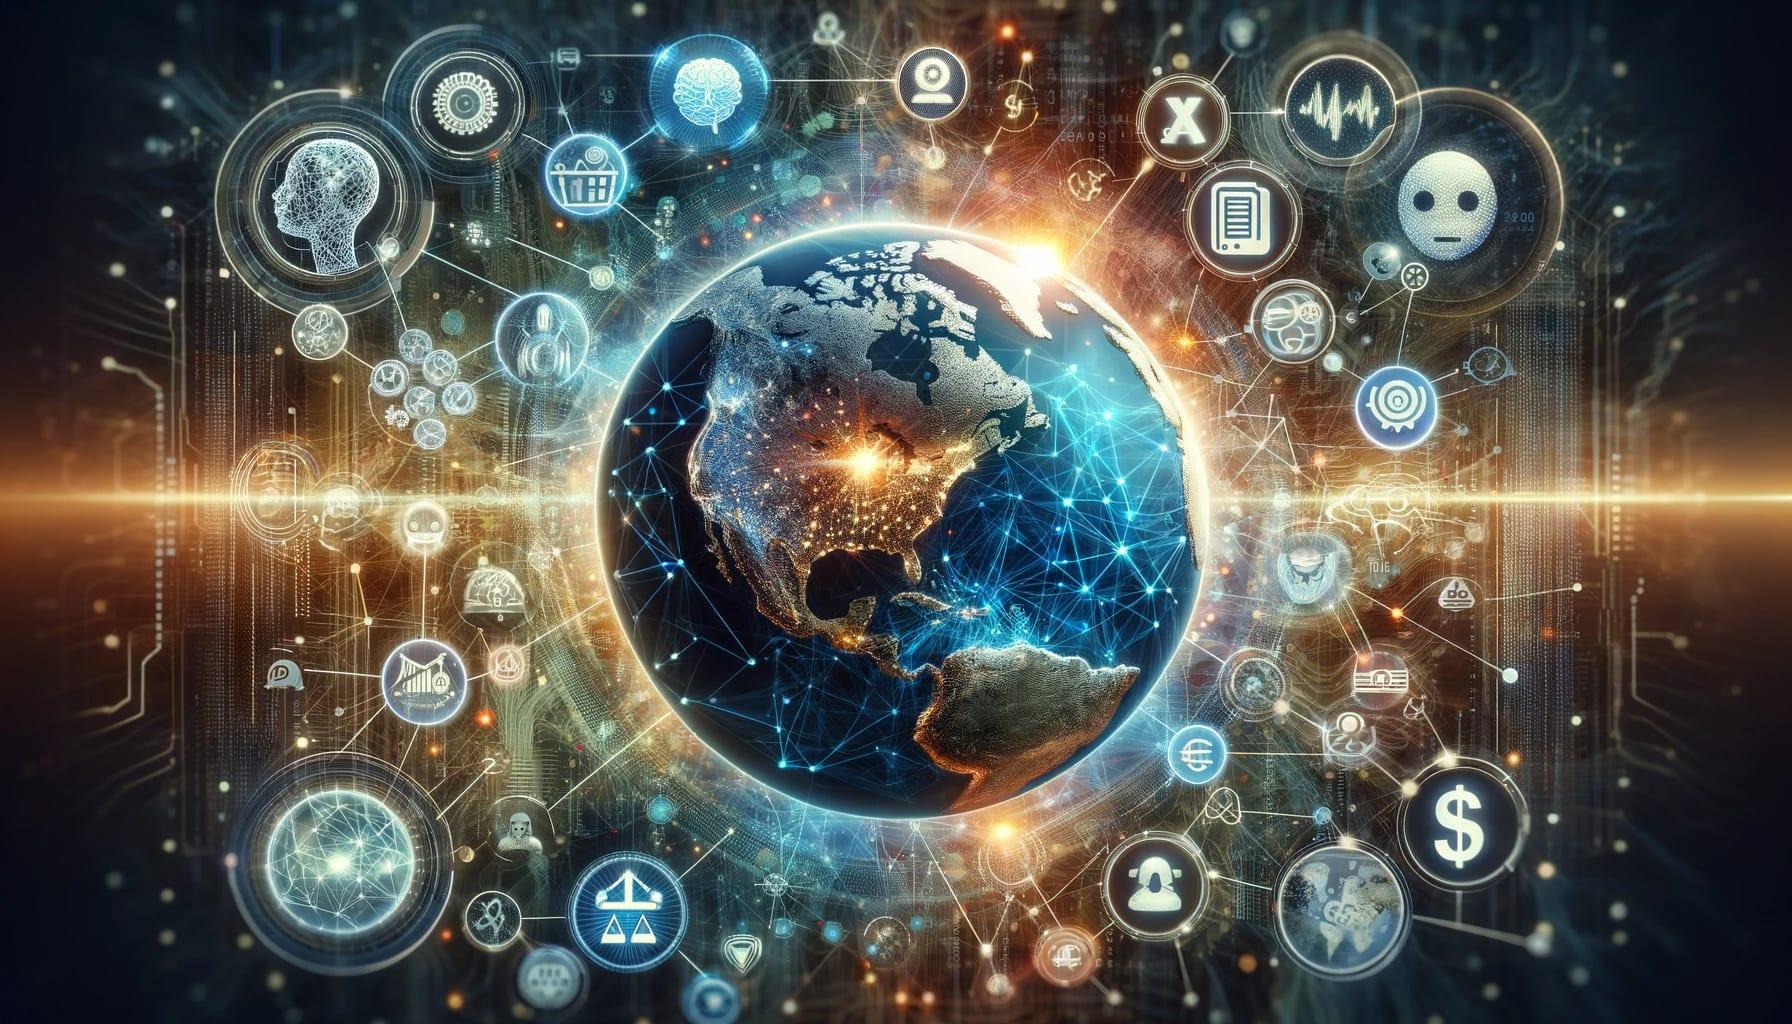 Explore the convergence of artificial intelligence and global economics in this striking visual. The digital image captures a luminous Earth at the center, surrounded by iconic symbols representing AI, data analytics, finance, and technology that are interconnected, illustrating the profound influence of AI on economic activities worldwide.